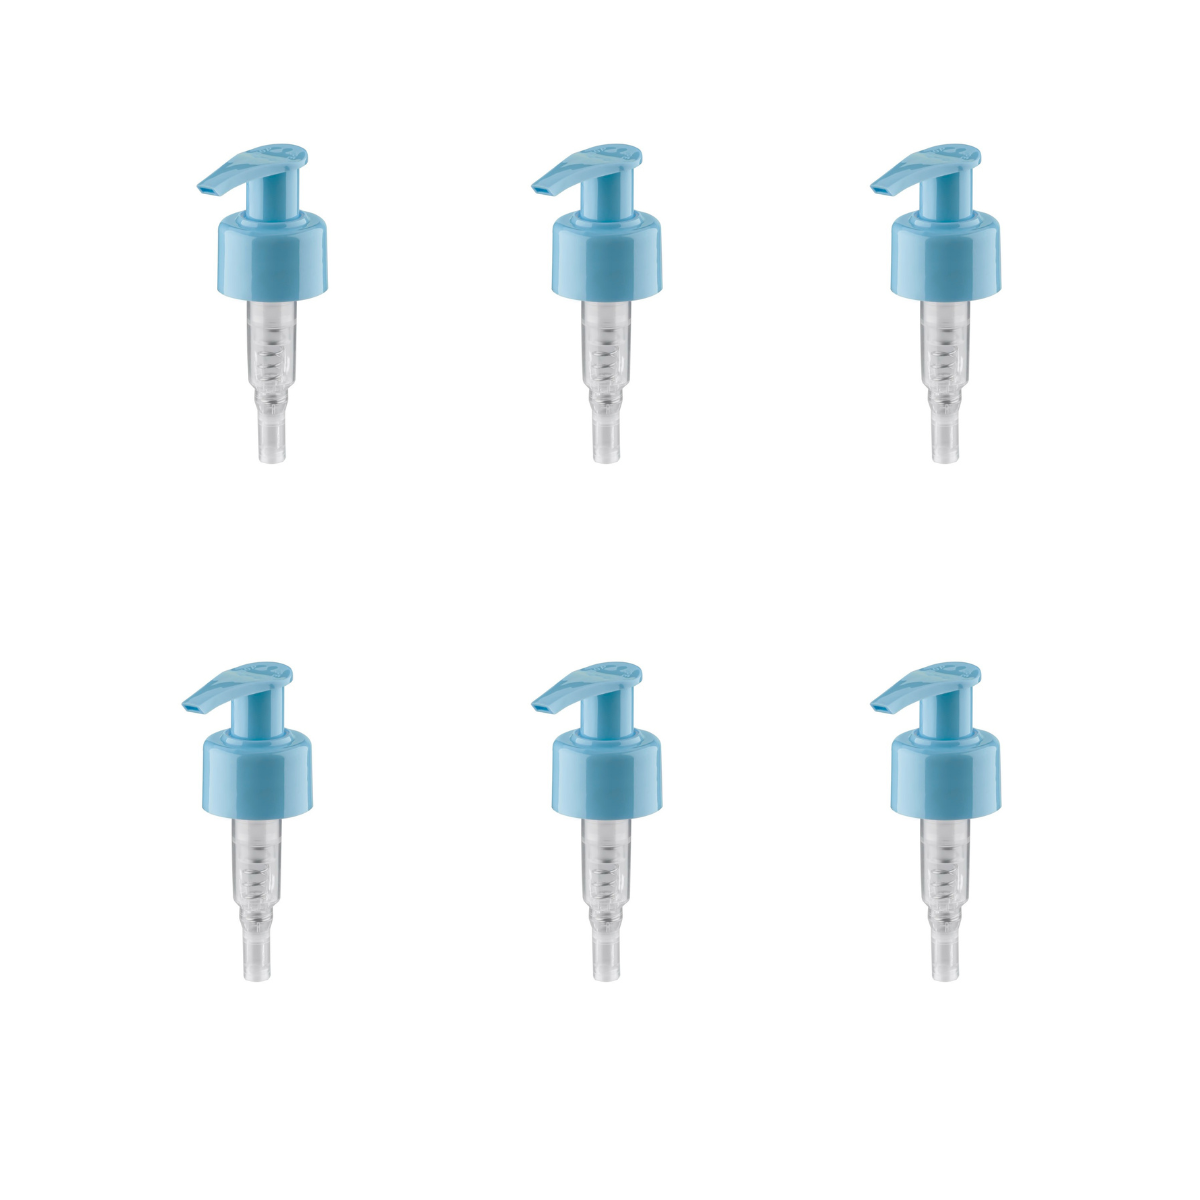 Dompel Pump valves, color blue, thread 28/410, made with stainless steel springs and glass balls, Model 303-A1. (Pump heads only, bottles not included) - depilcompany